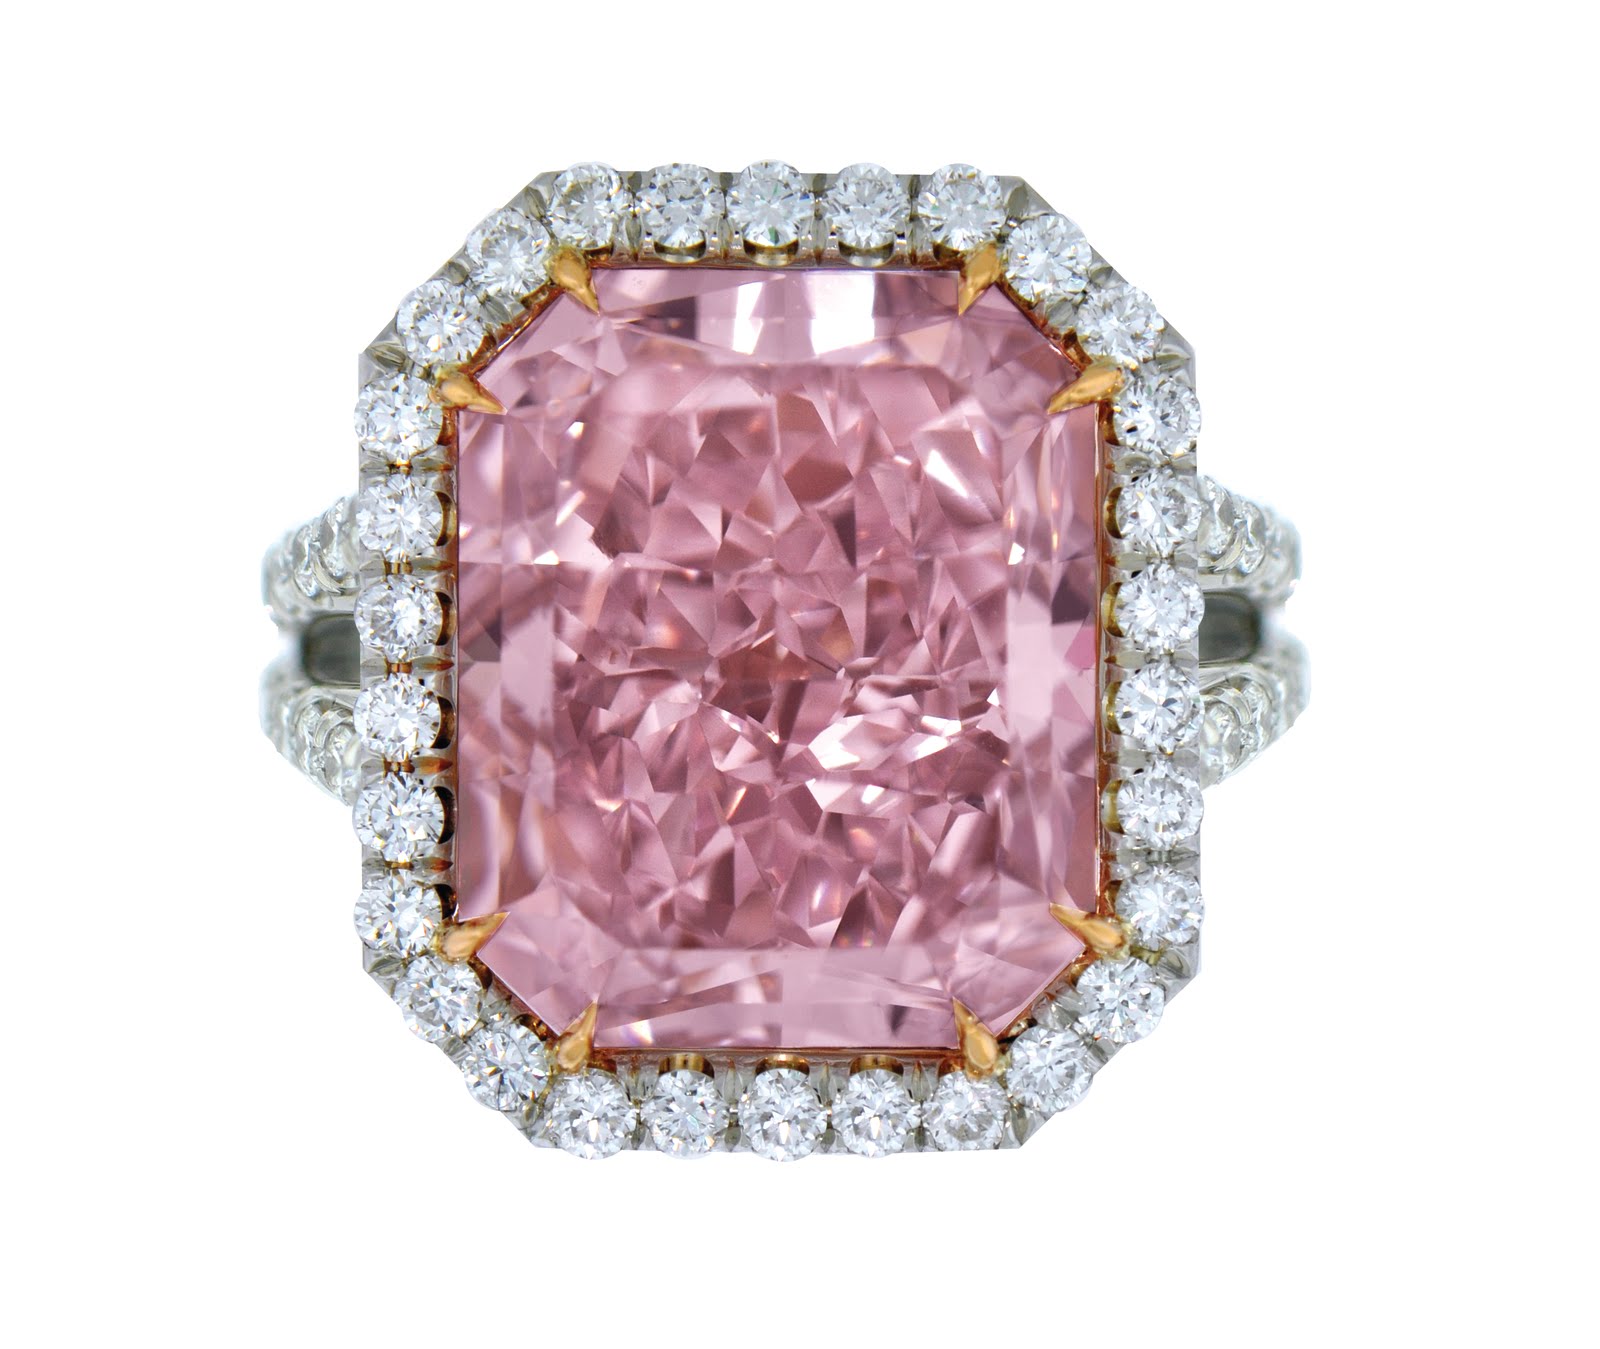 Jewelry News Network: Supersized Fancy Colored Diamond Rings from 